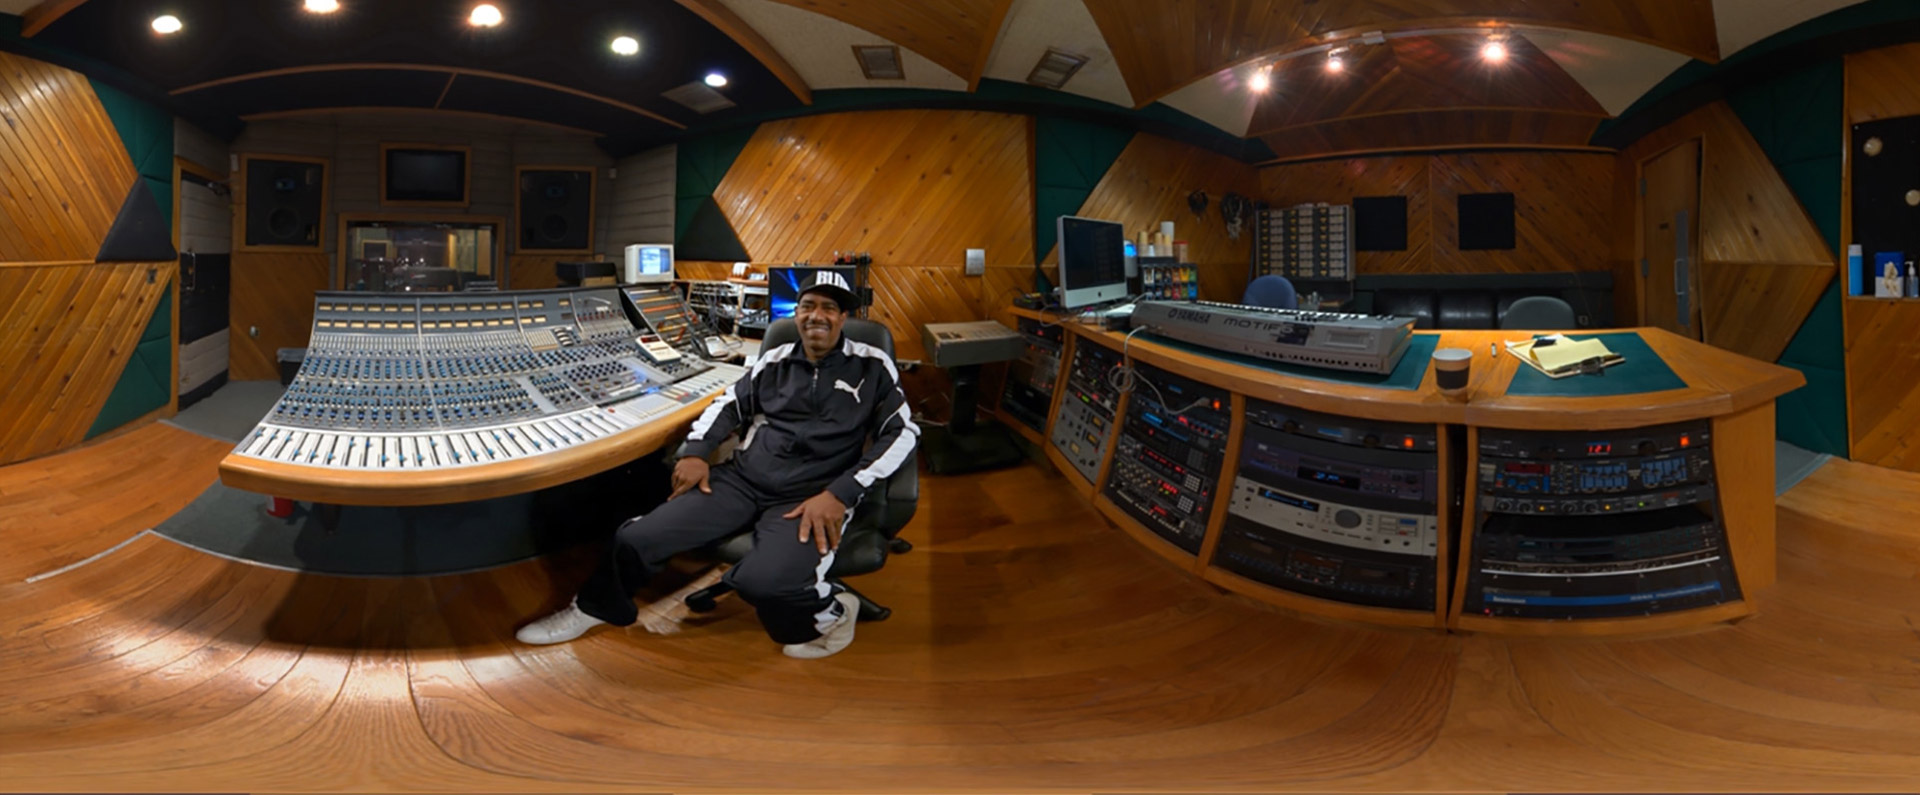 A fish-eye view of a man sitting at a mixing desk in a recording studio.